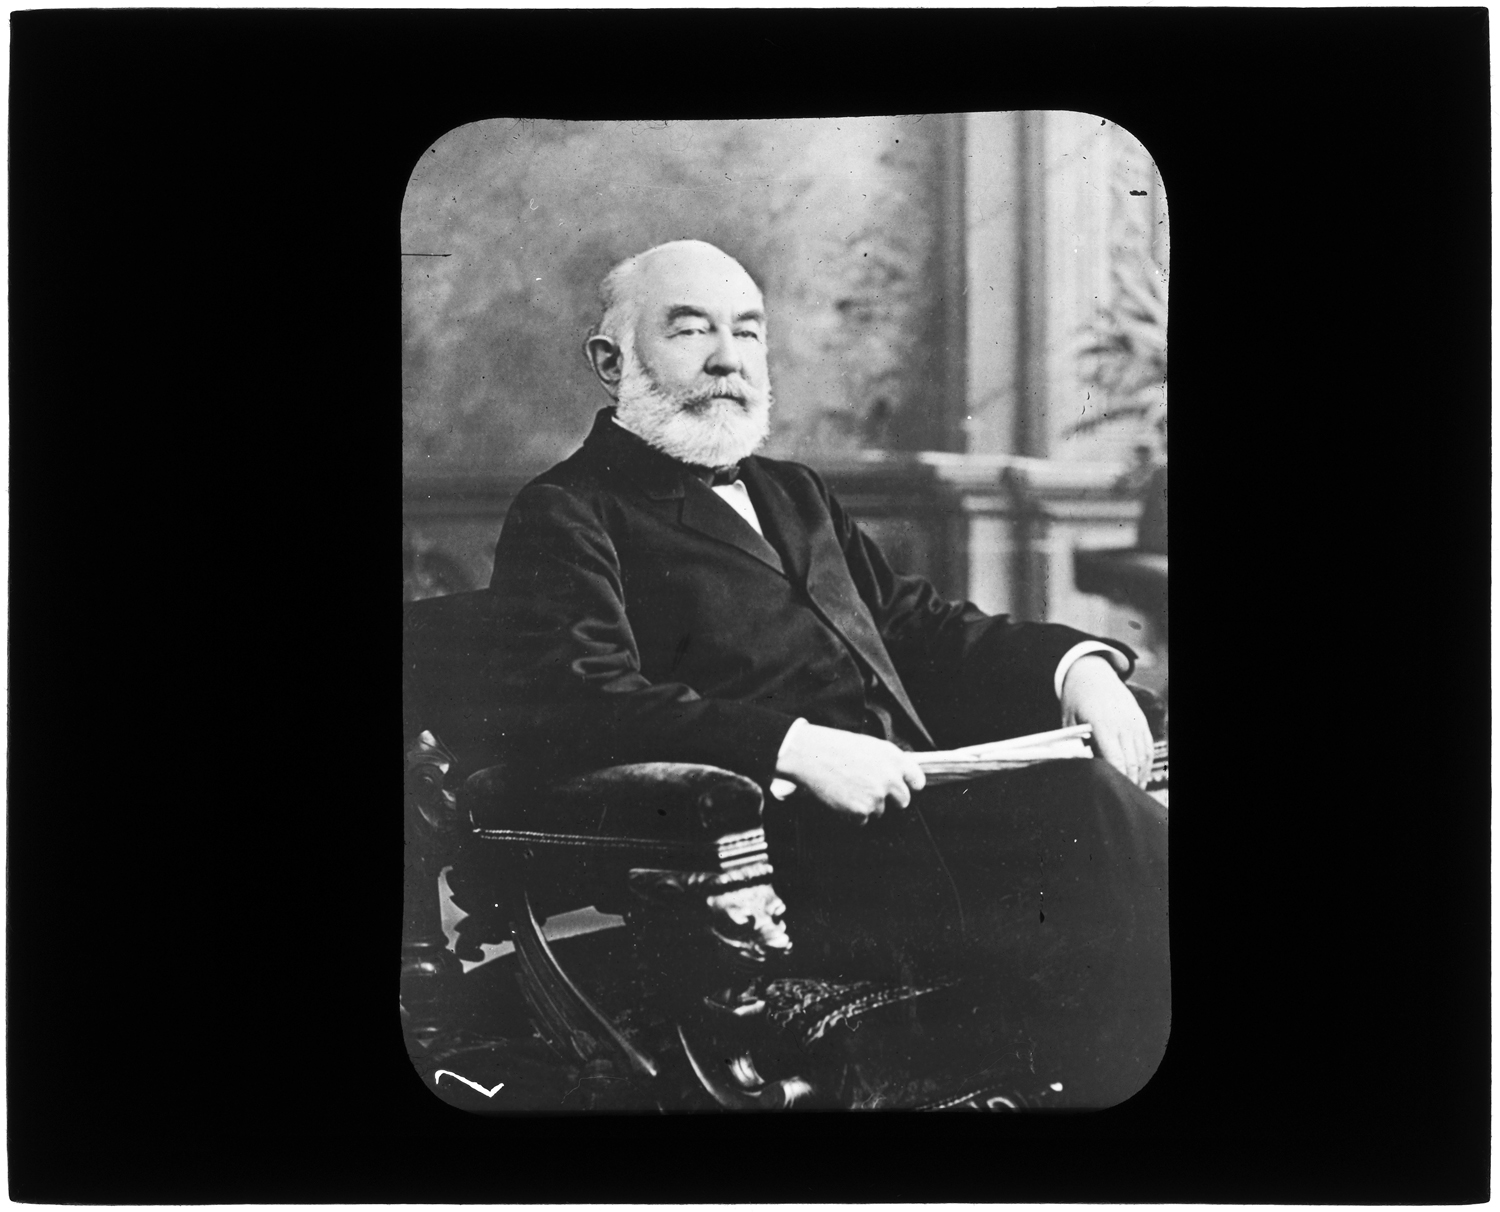 Henry R. Glover, seated portrait, circa 1890